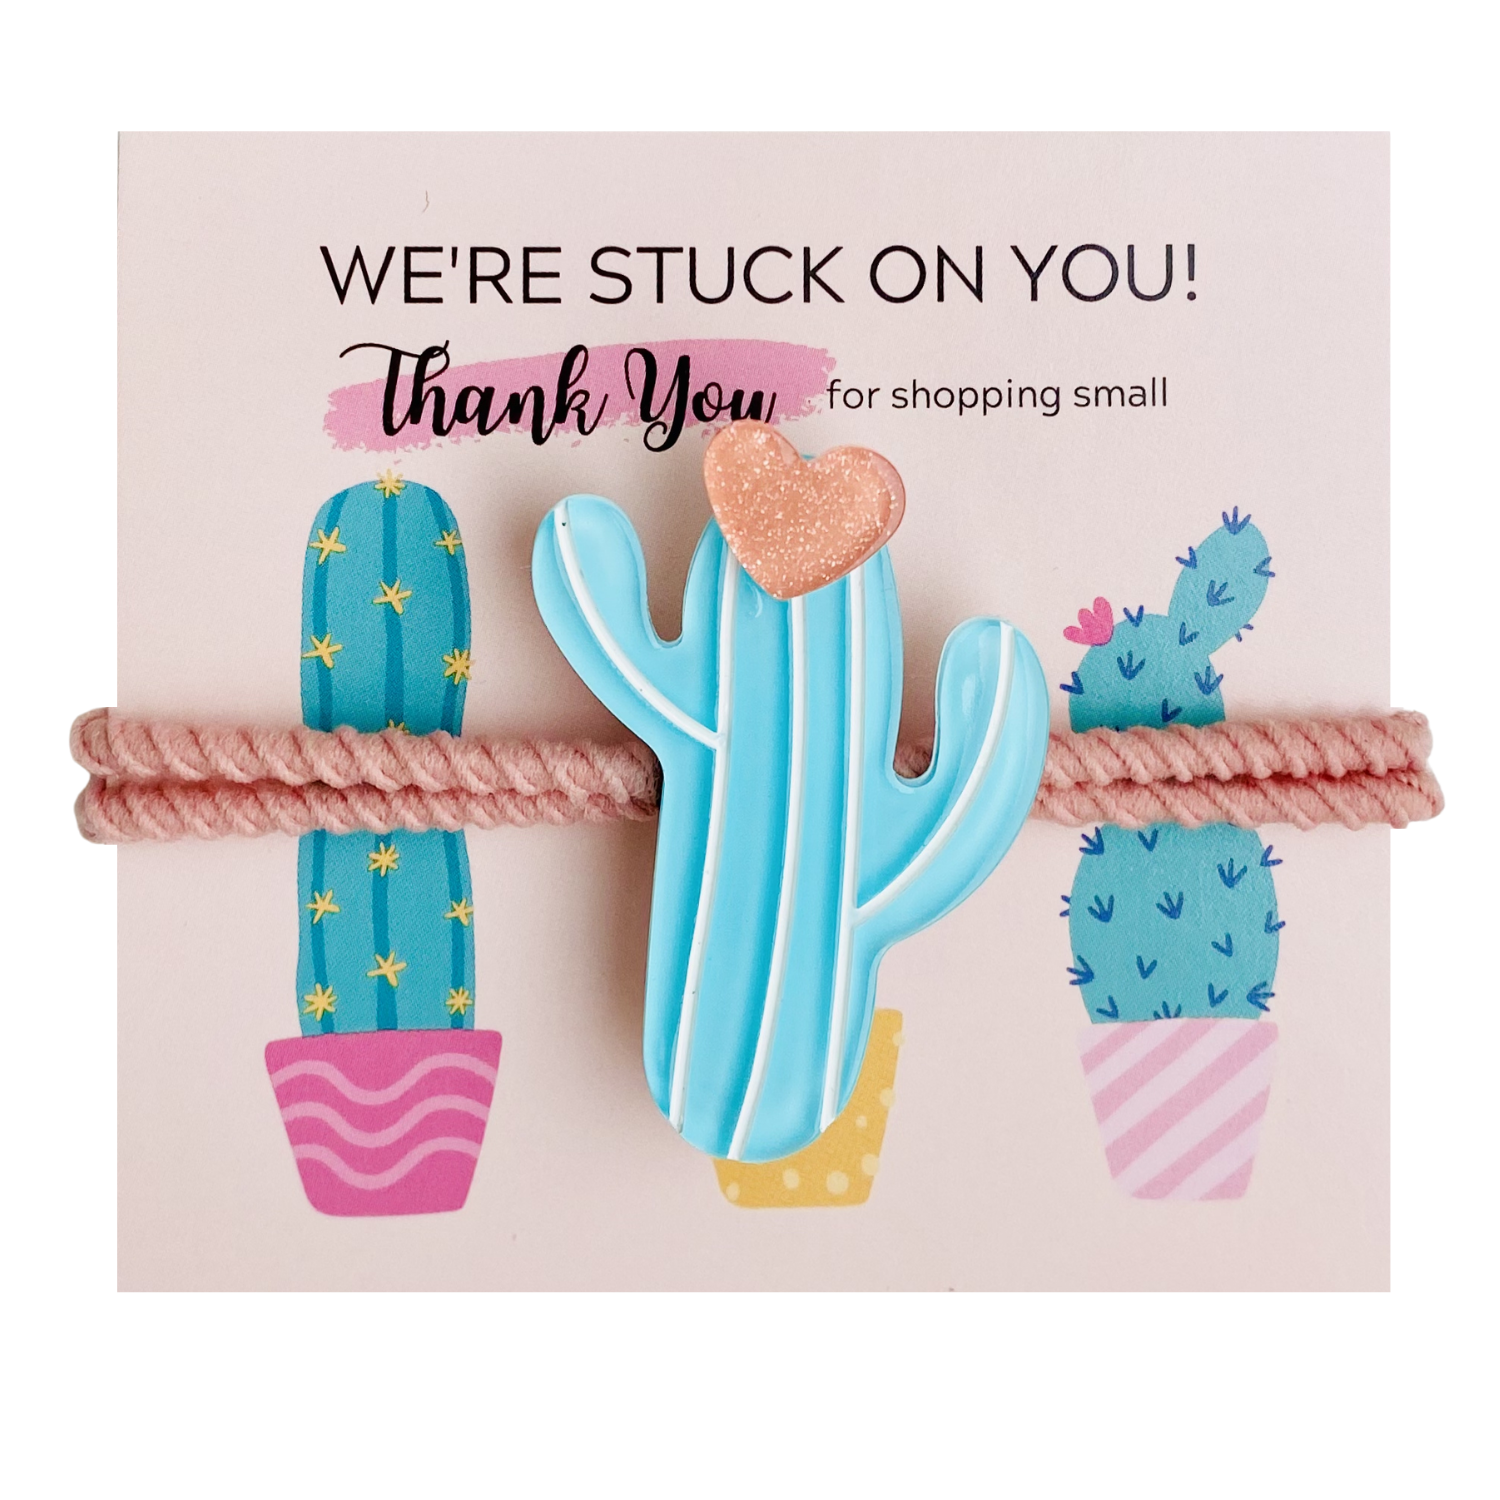 Stuck on You Hair Tie (10pc)